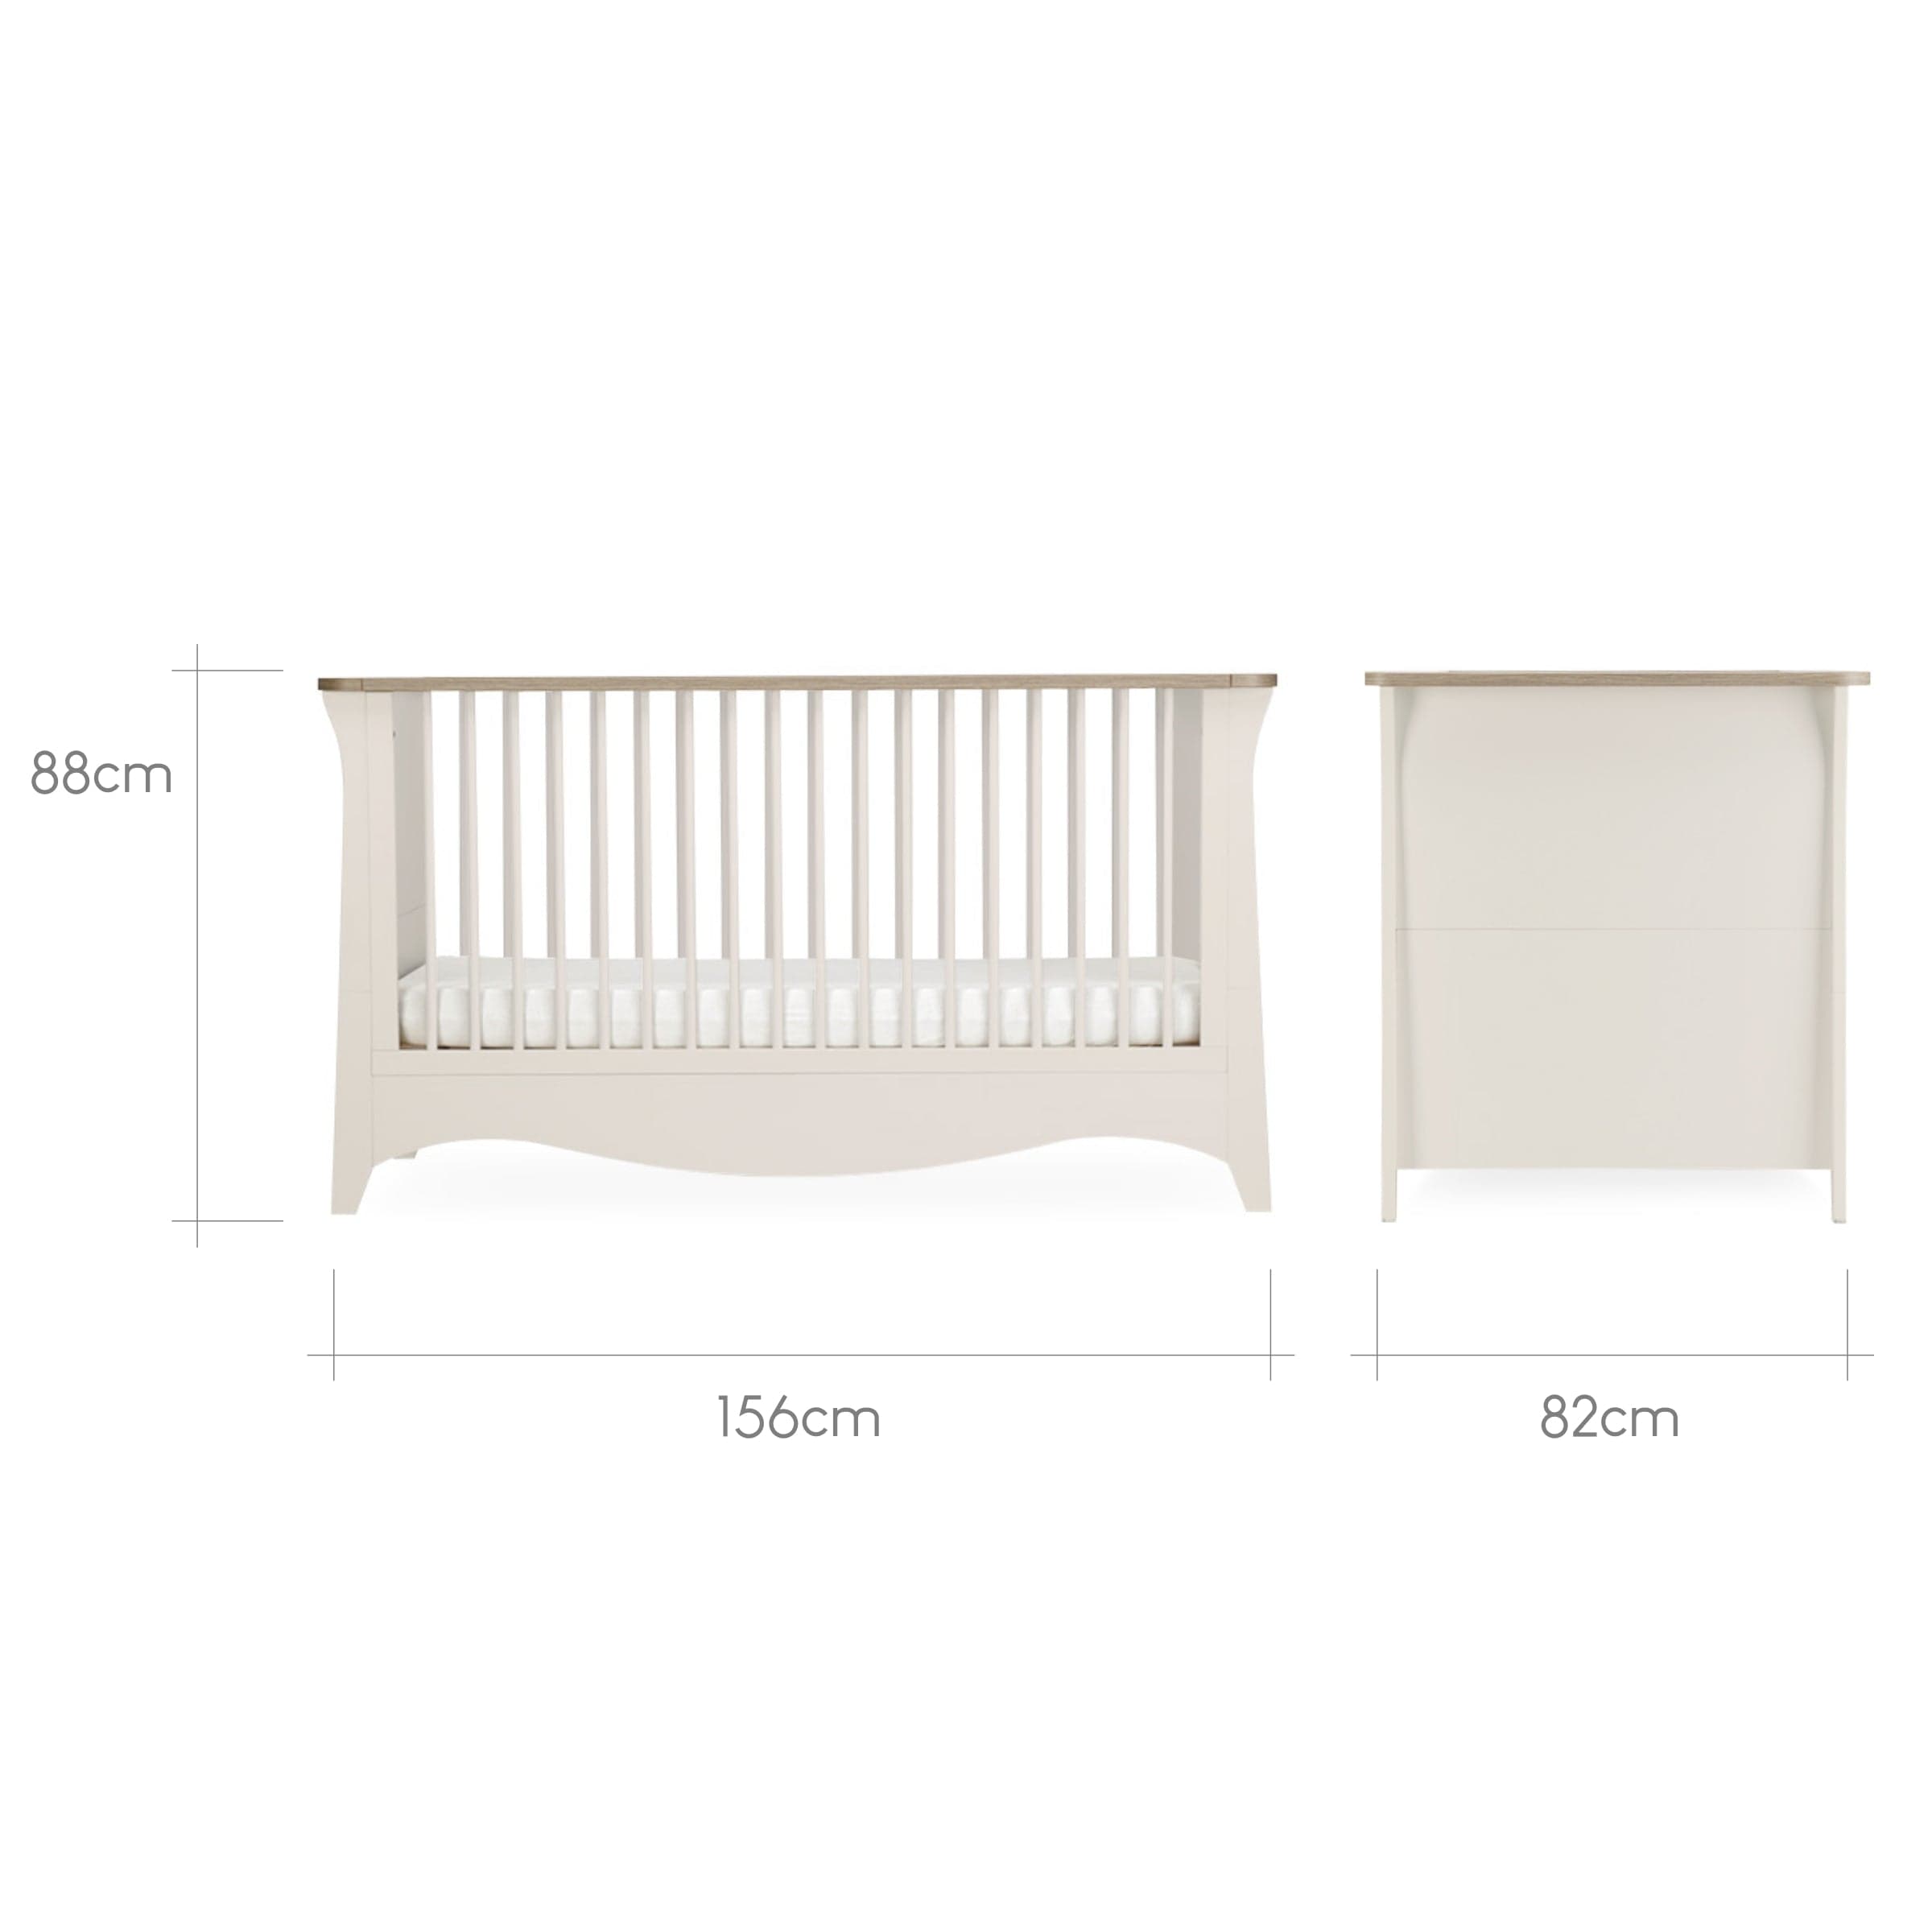 CuddleCo baby cot beds CuddleCo Clara Cot Bed - Cashmere